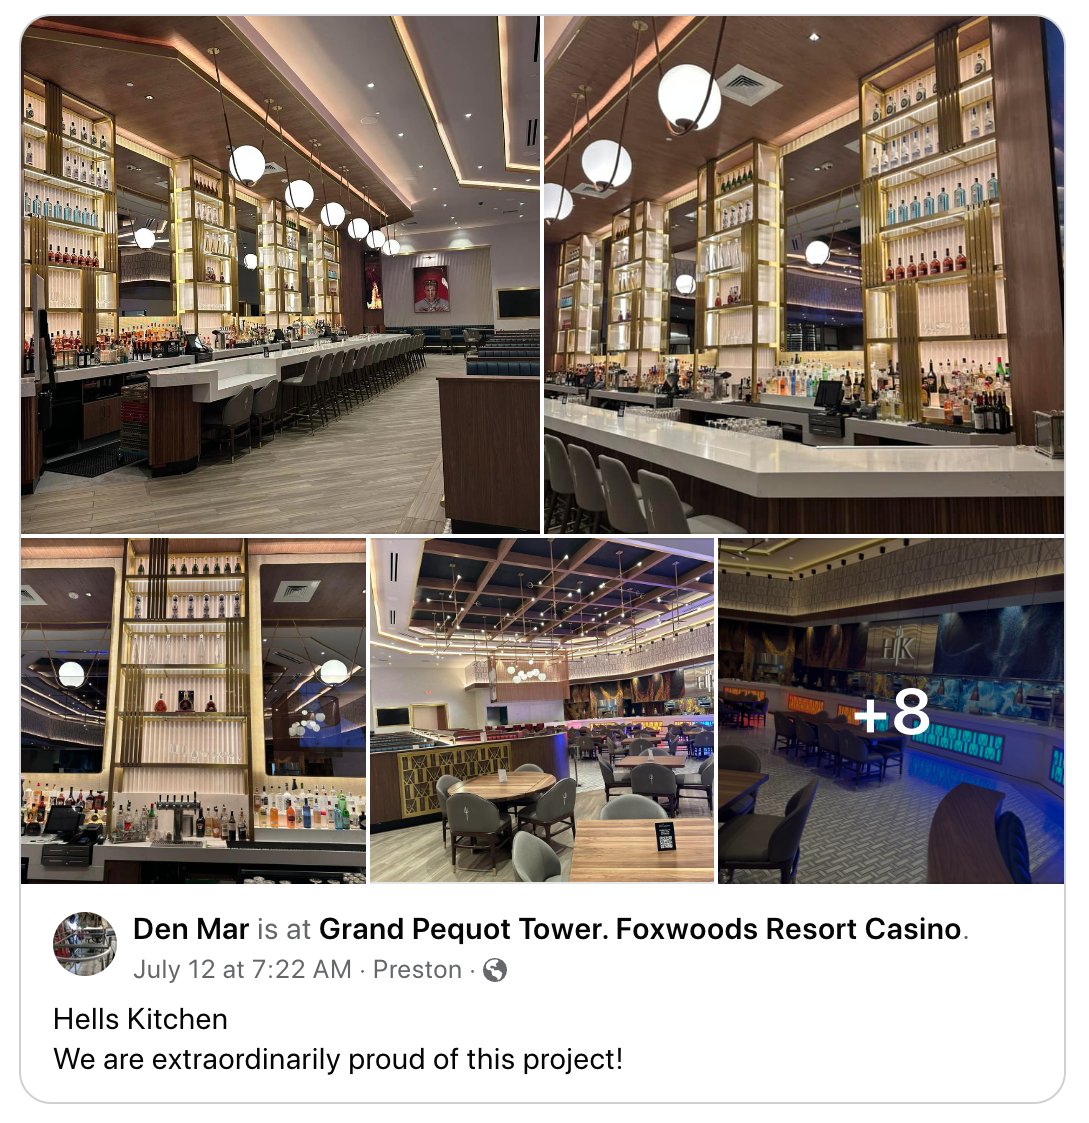 Thank you Den Mar for allowing us to powder coat your fabulous work! We are extremely grateful you included us in this project! #hellskitchen #powdercoating #foxwoodsresortcasino #gordonramsay